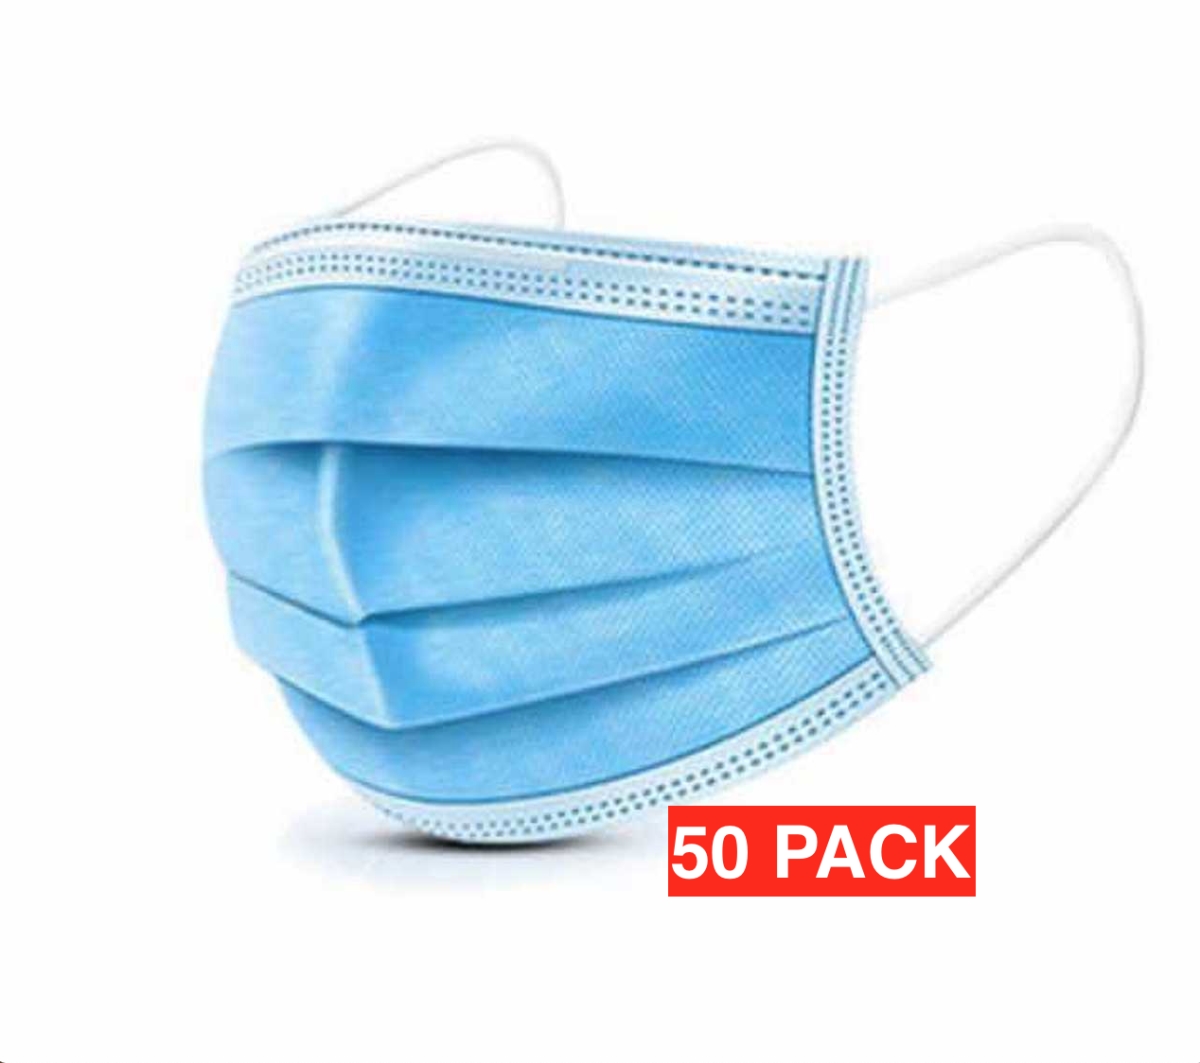 Picture of Gopremium BLUEMASK50PACK-3 PLY - COD567 Breathable & Comfortable for Blocking Dust Air Pollution Protection Disposable Face Mask with Elastic Ear Loop - Pack of 50